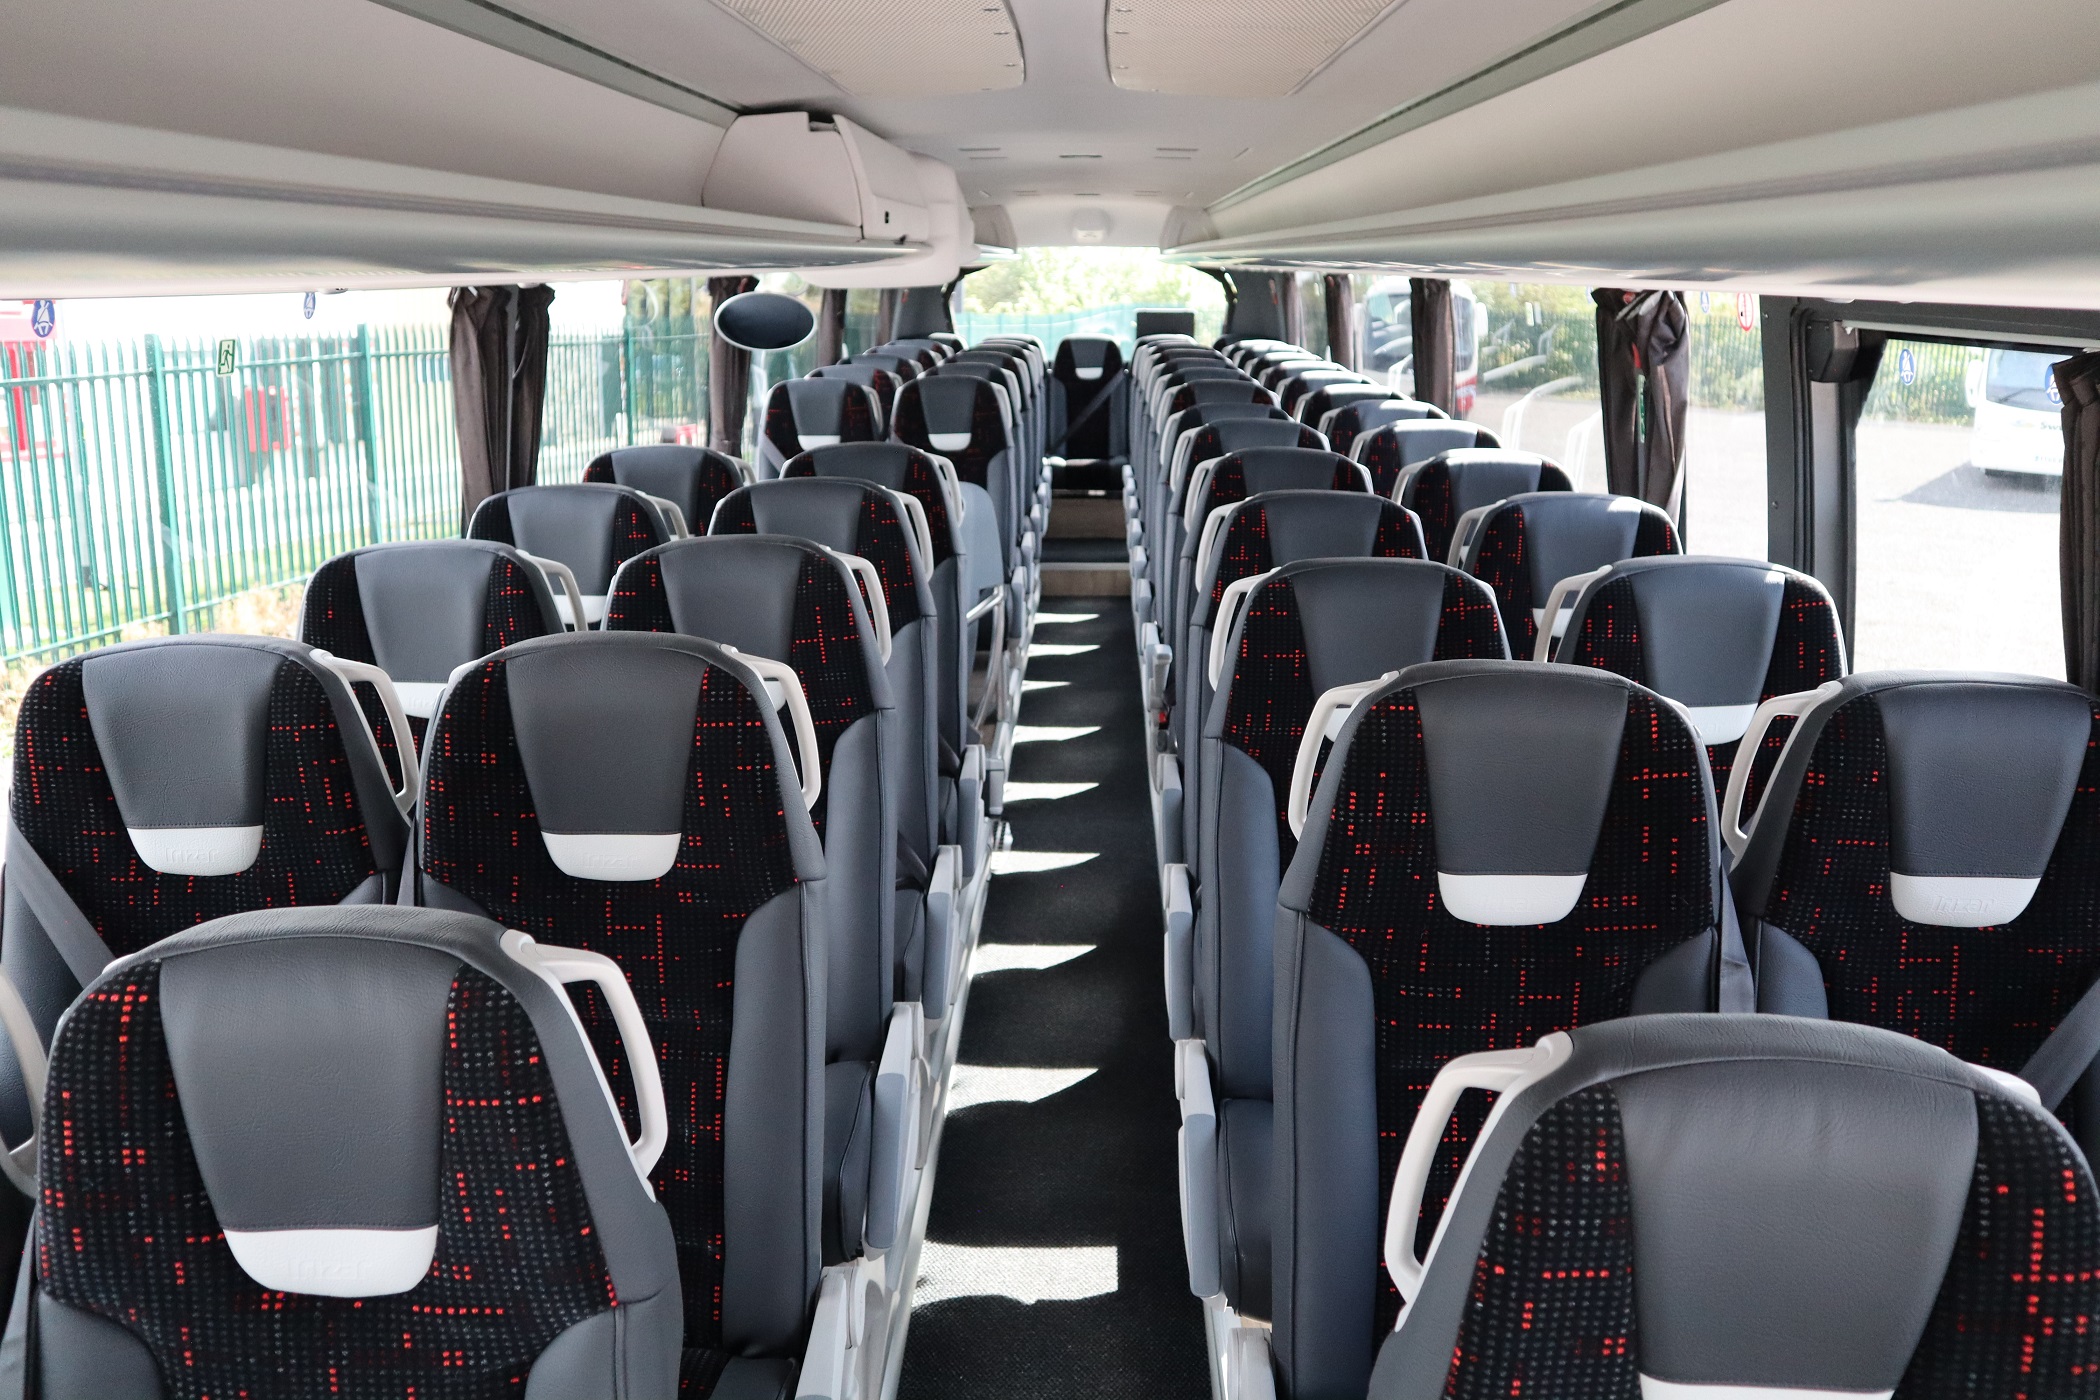 Interior of coach showing passenger area